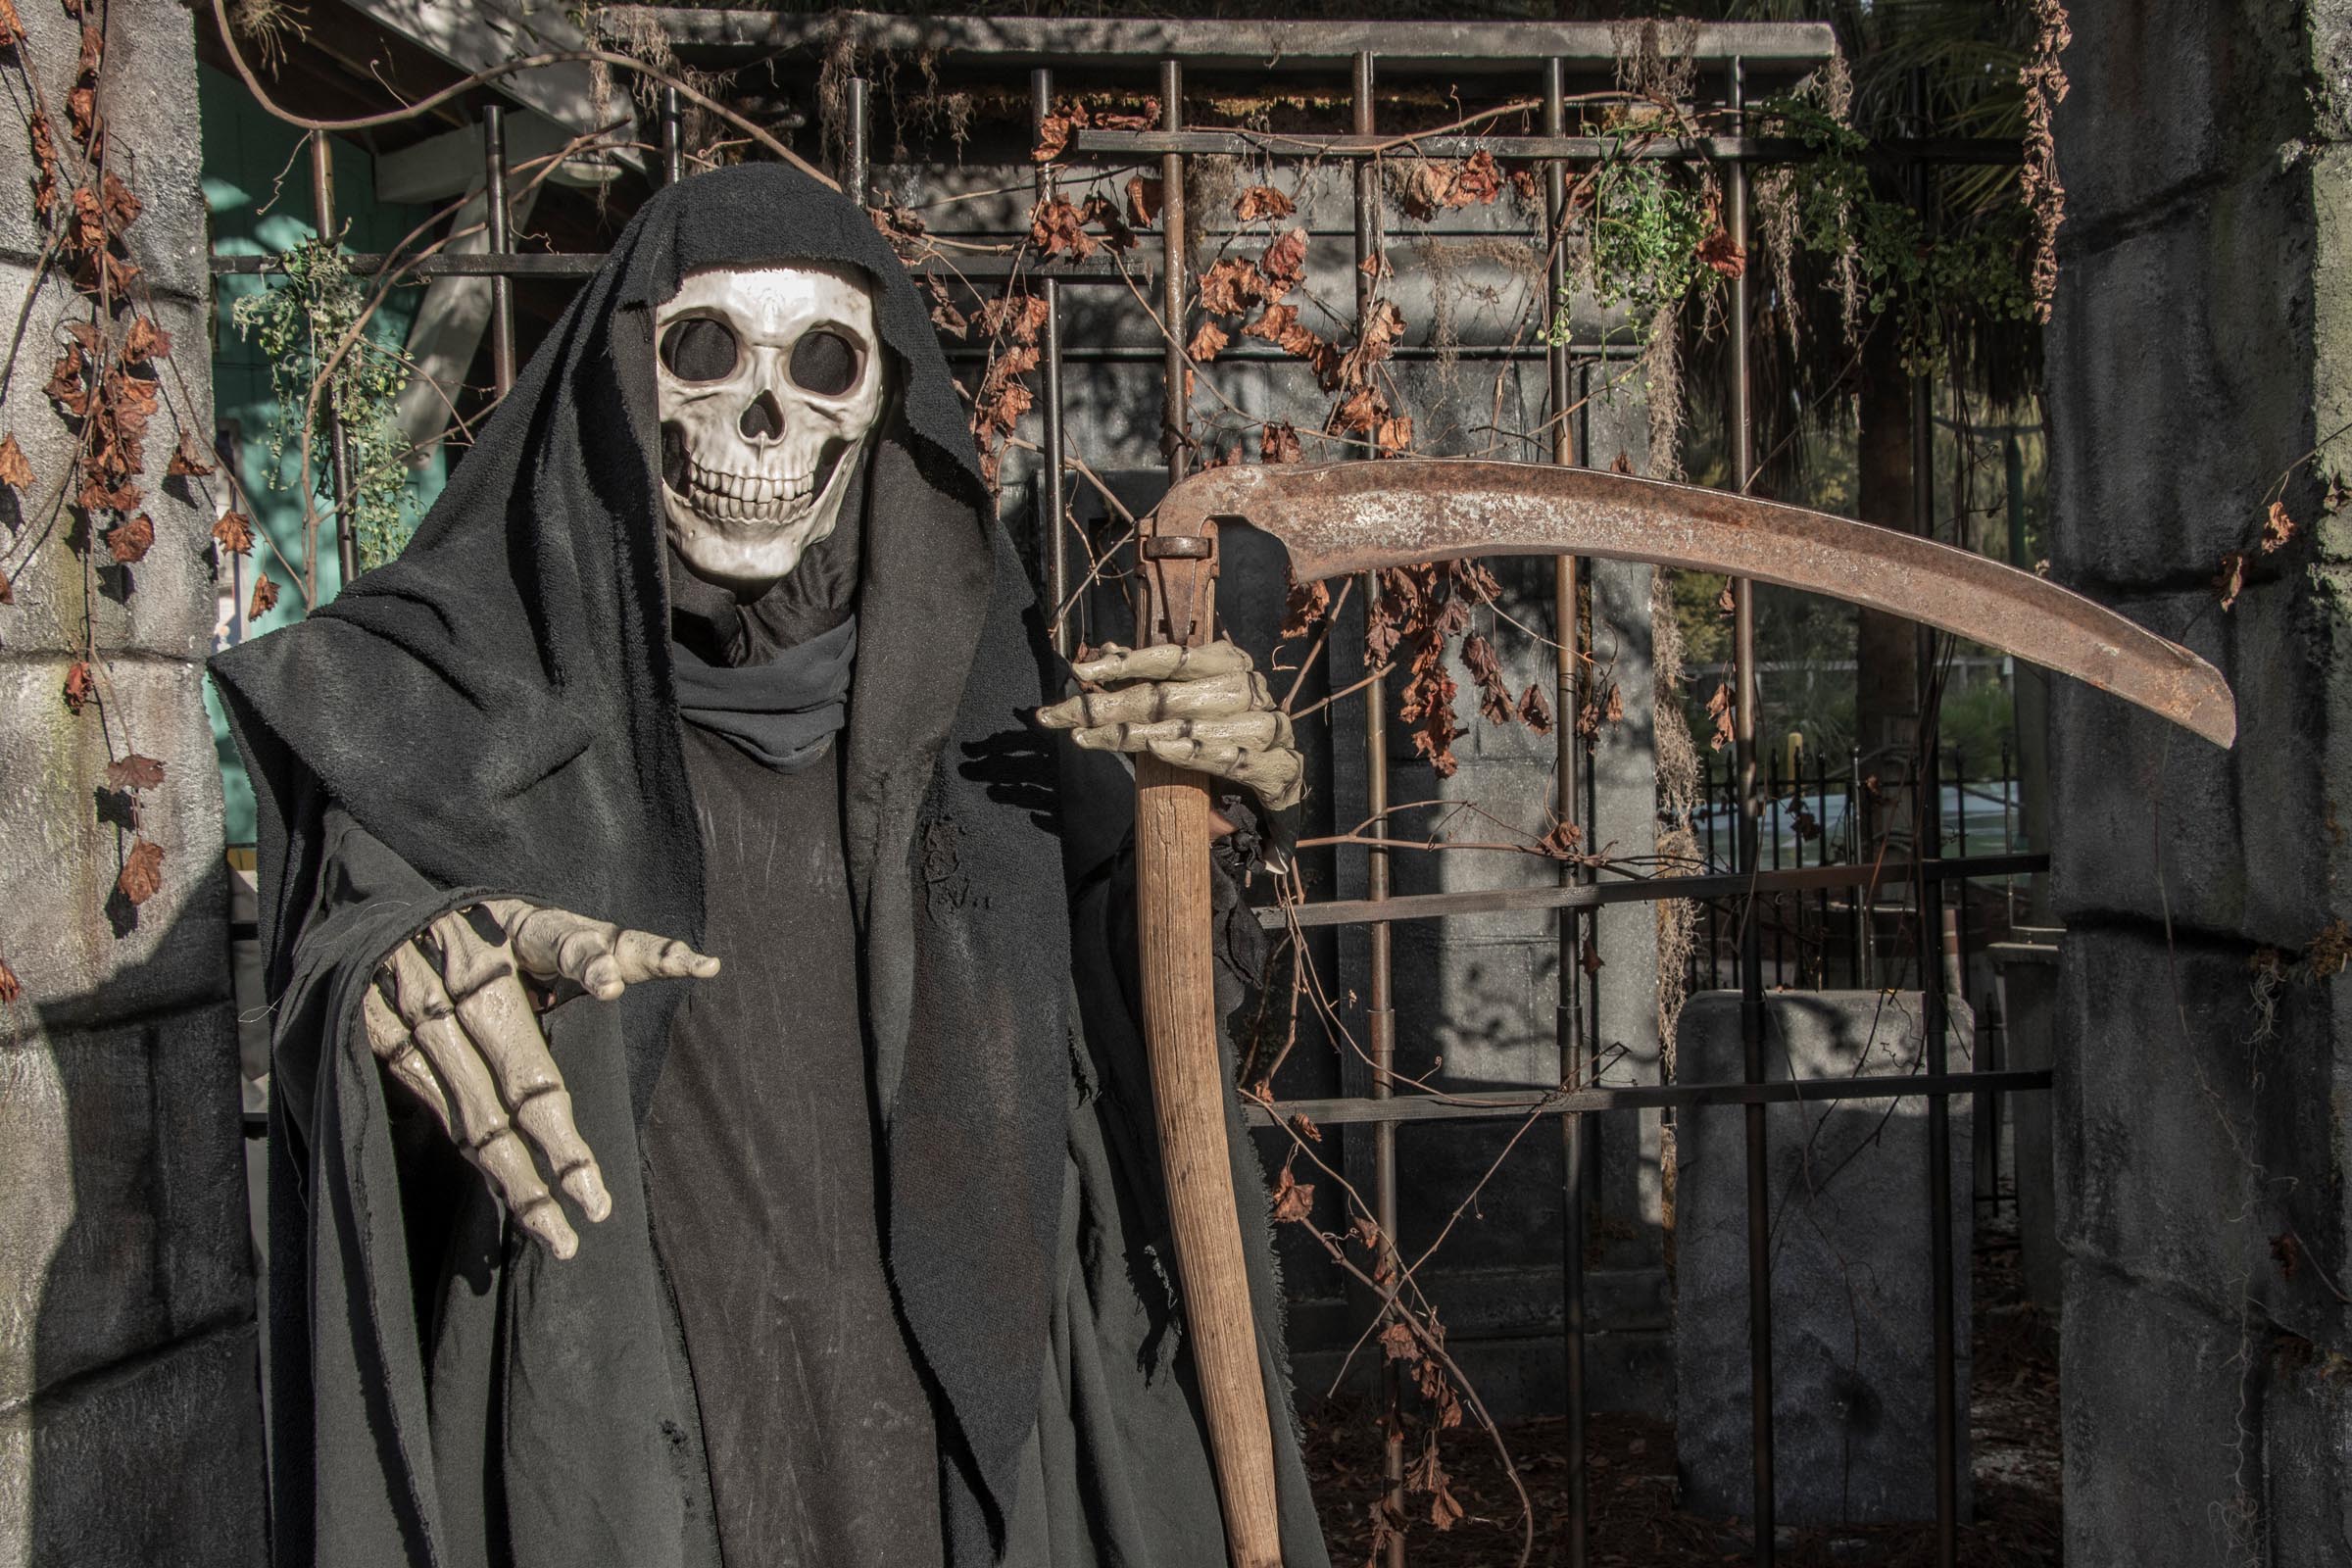 Meet our creepy animals at Gators, Ghosts and Goblins, Gatorland's Halloween event!